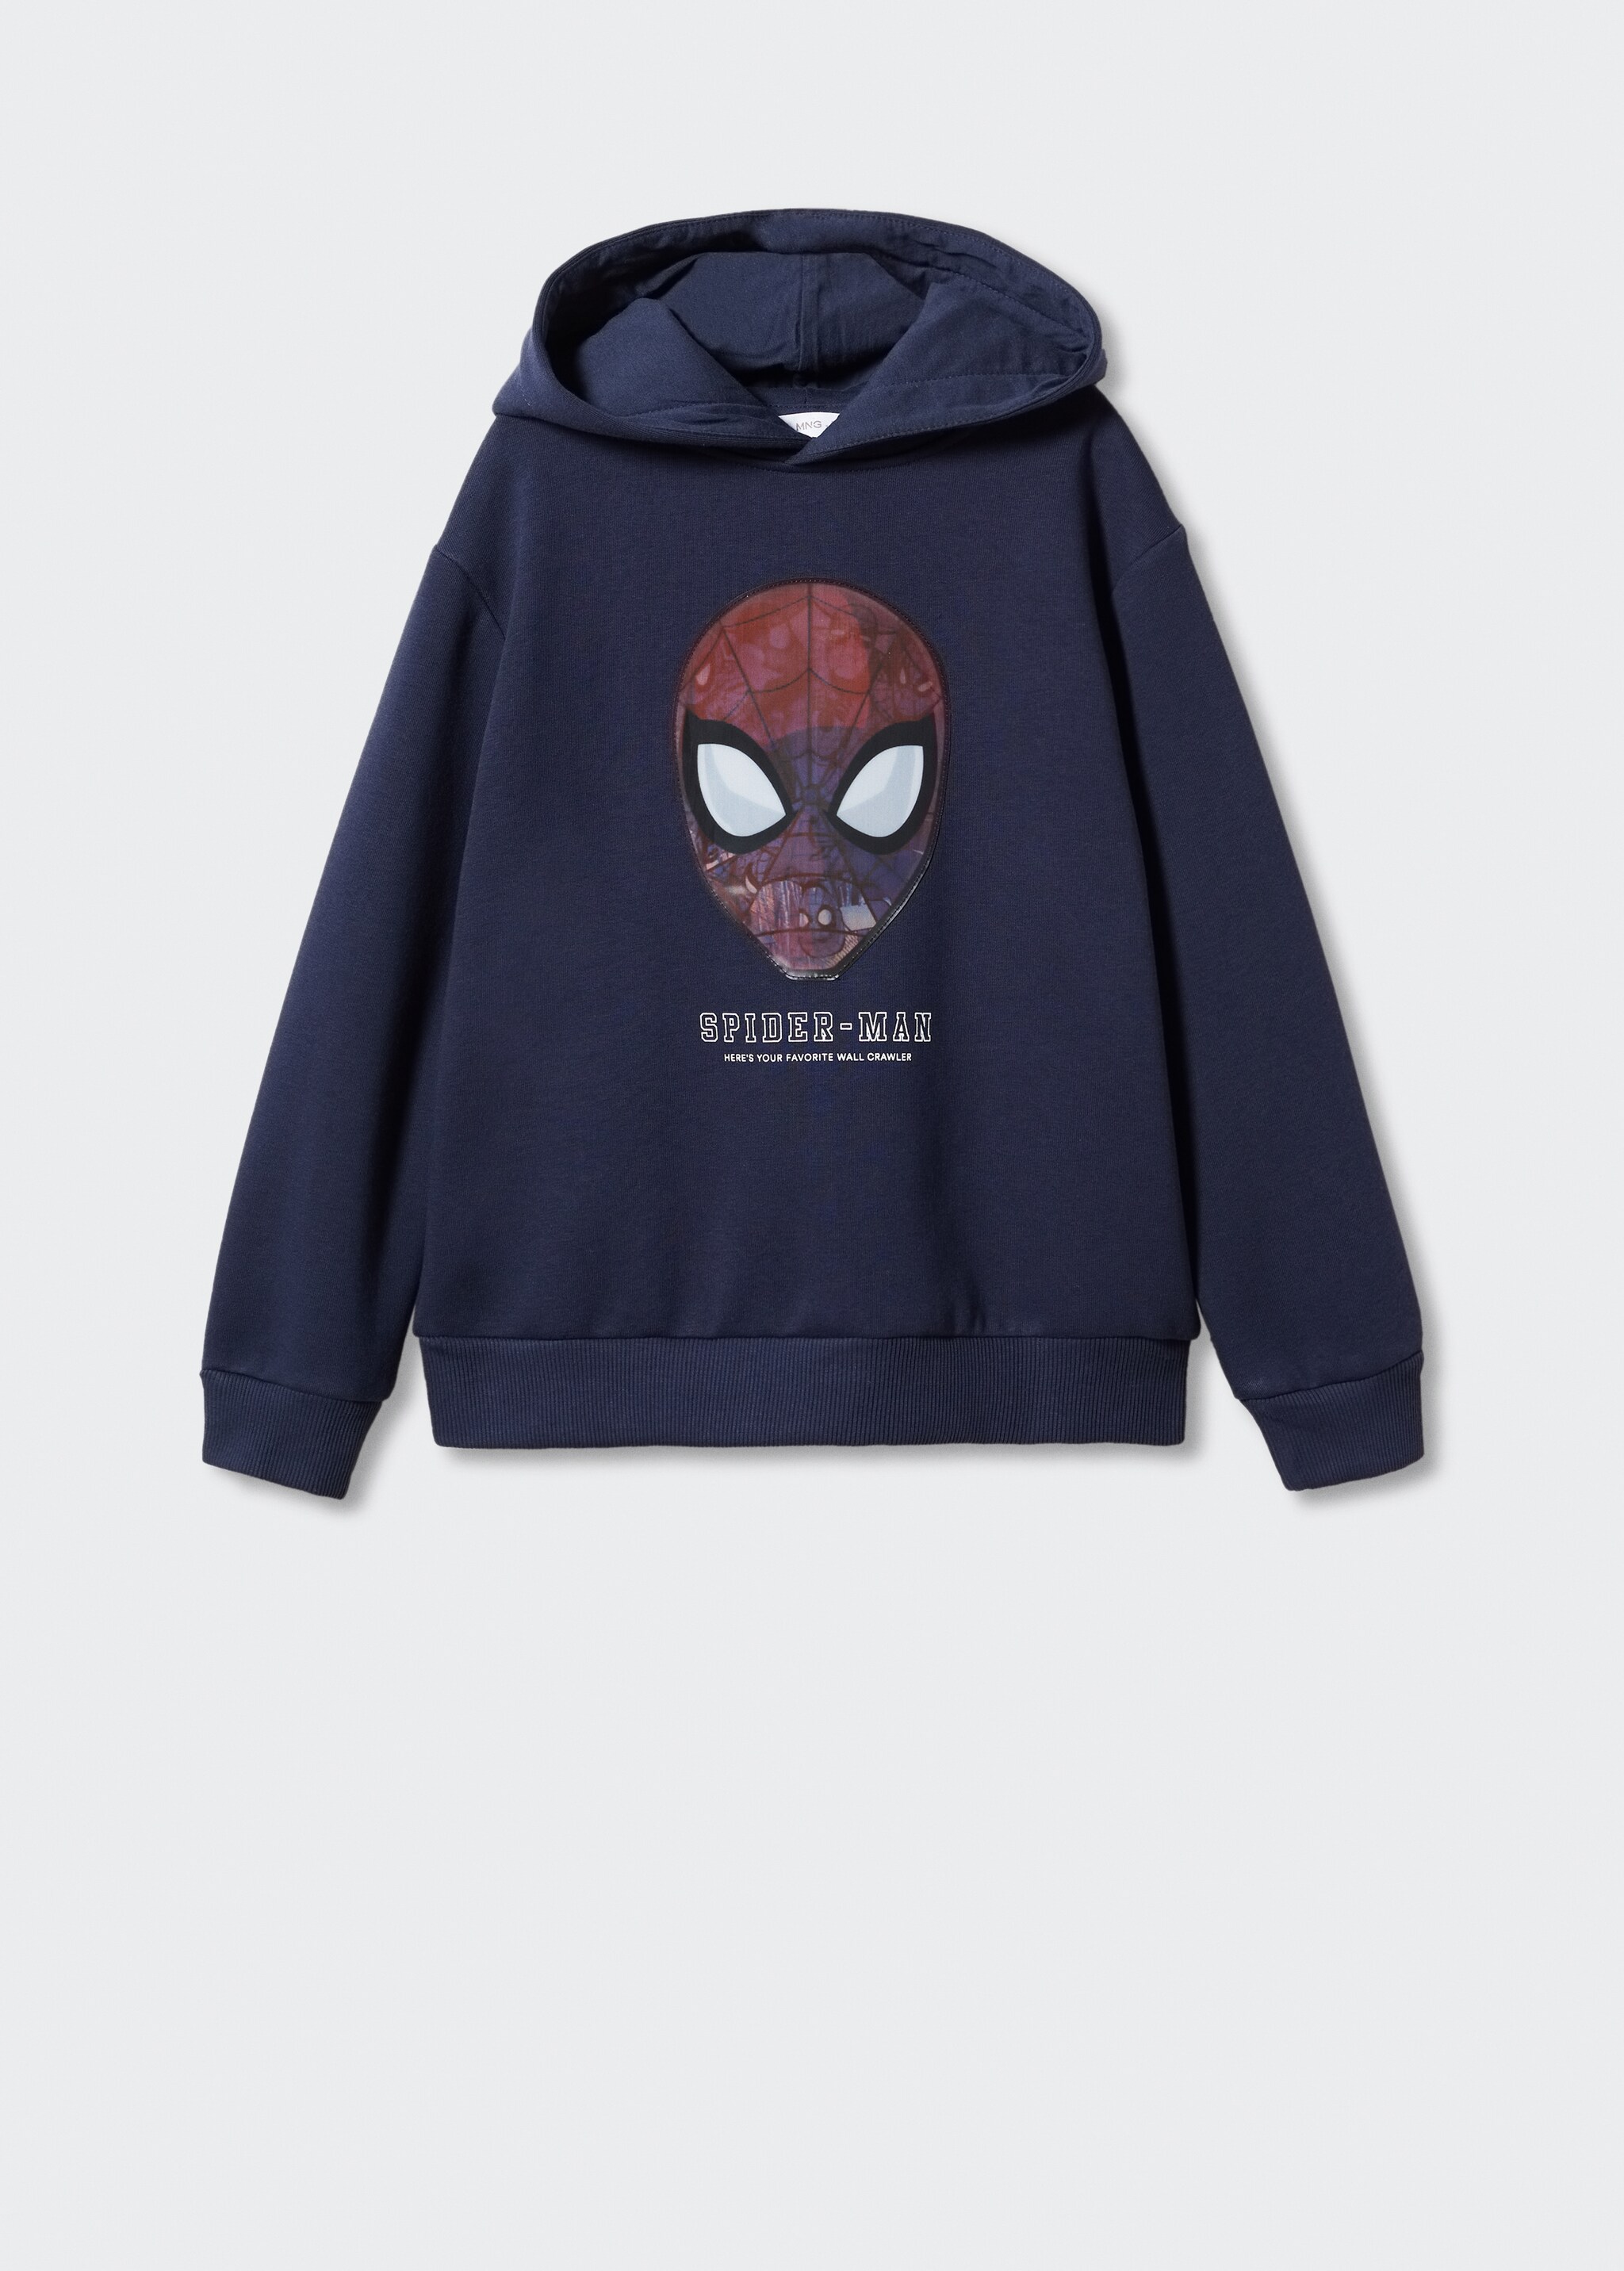 Spider-Man sweatshirt - Article without model